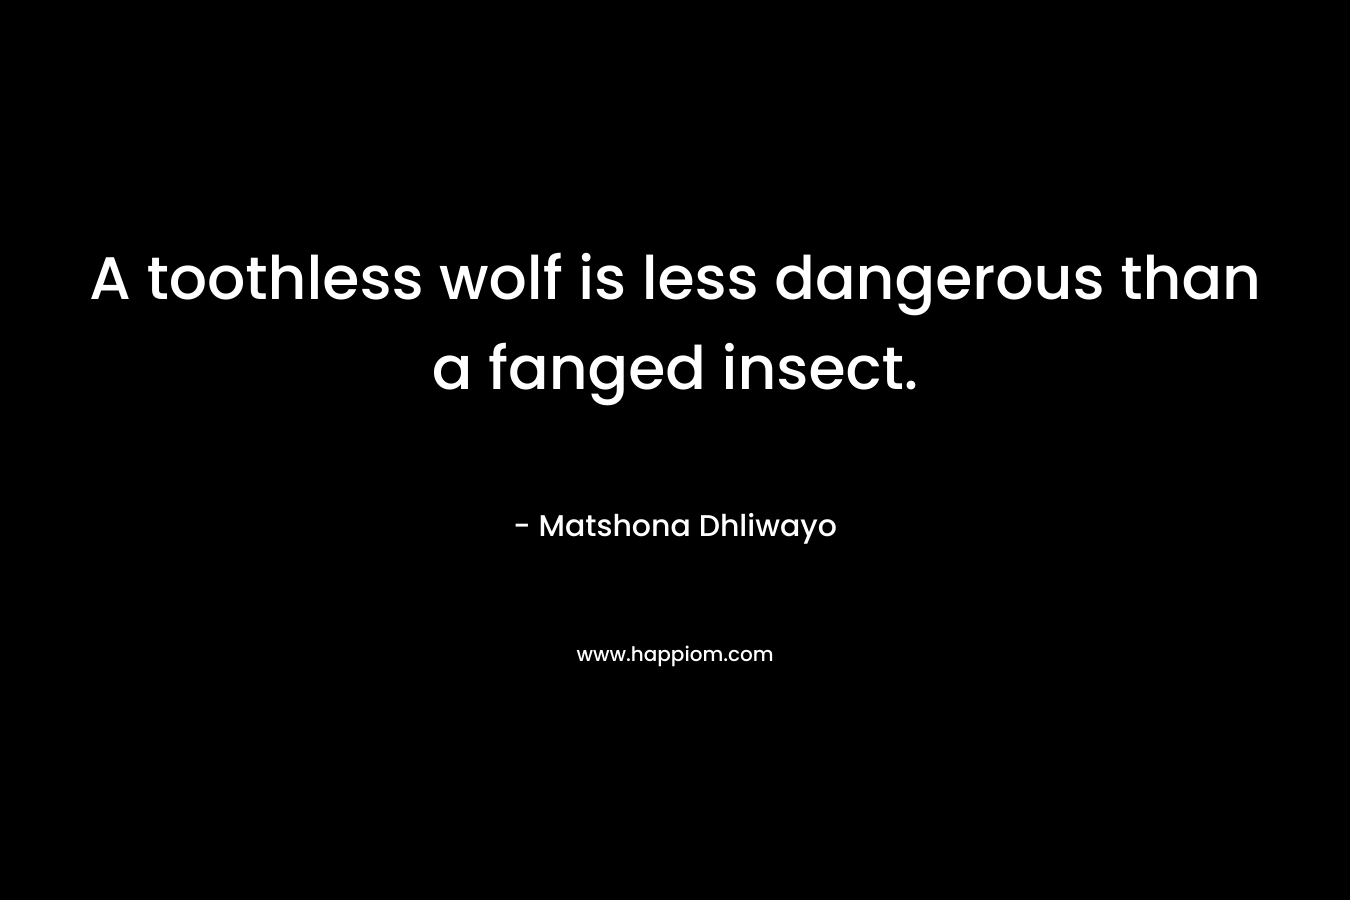 A toothless wolf is less dangerous than a fanged insect.